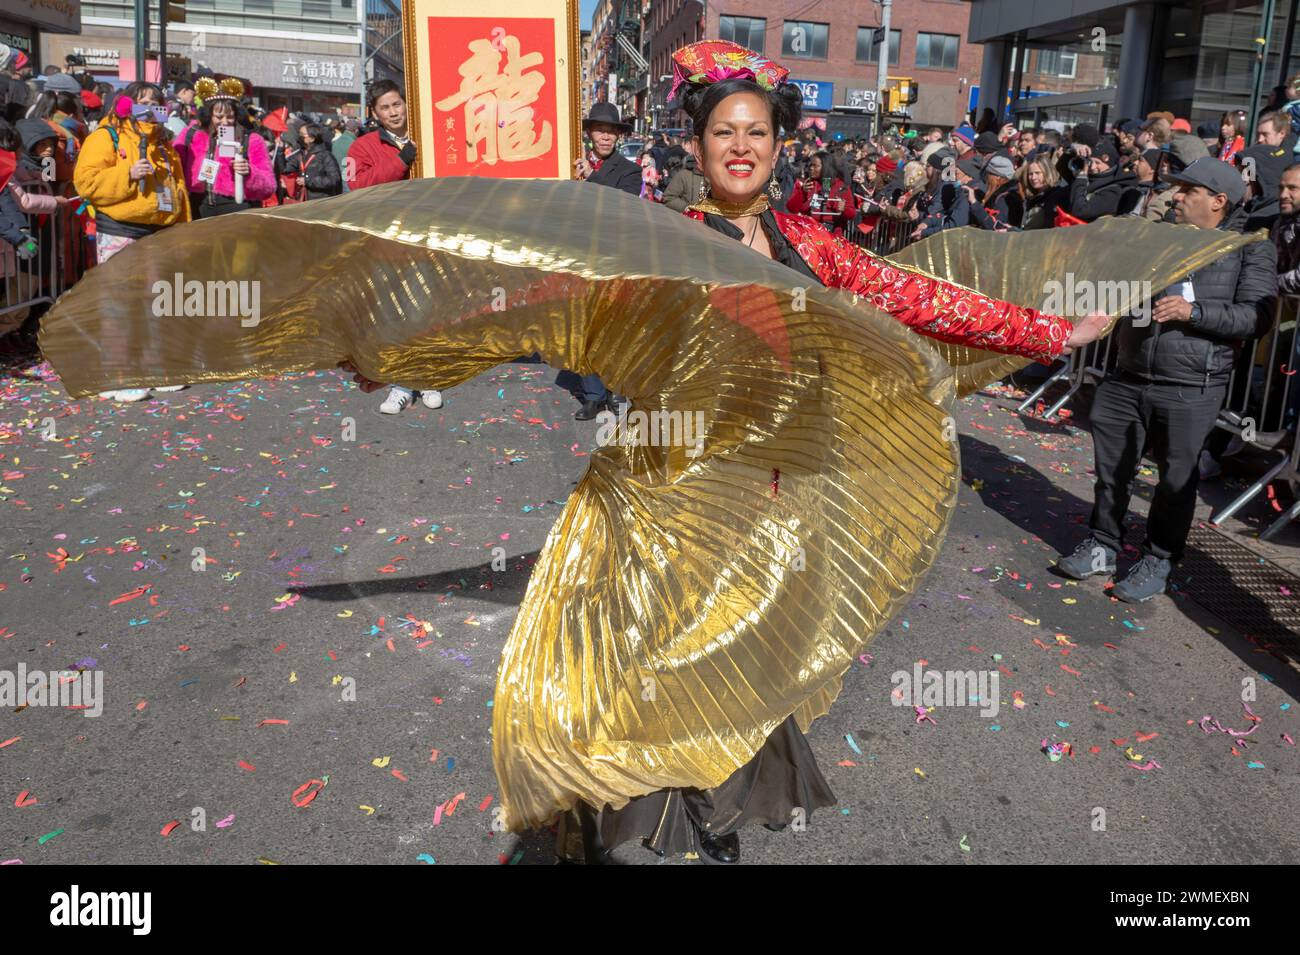 New York, United States. 25th Feb, 2024. NEW YORK, NEW YORK - FEBRUARY 25: A dancer performs at the annual Lunar New Year parade in Chinatown on February 25, 2024 in New York City. People gathered to enjoy and celebrate the 26th annual Lunar New Year parade, commemorating the end of the 15 days honoring the first new moon on the lunar calendar. 2024 is the 'Year of the Dragon.' Credit: Ron Adar/Alamy Live News Stock Photo